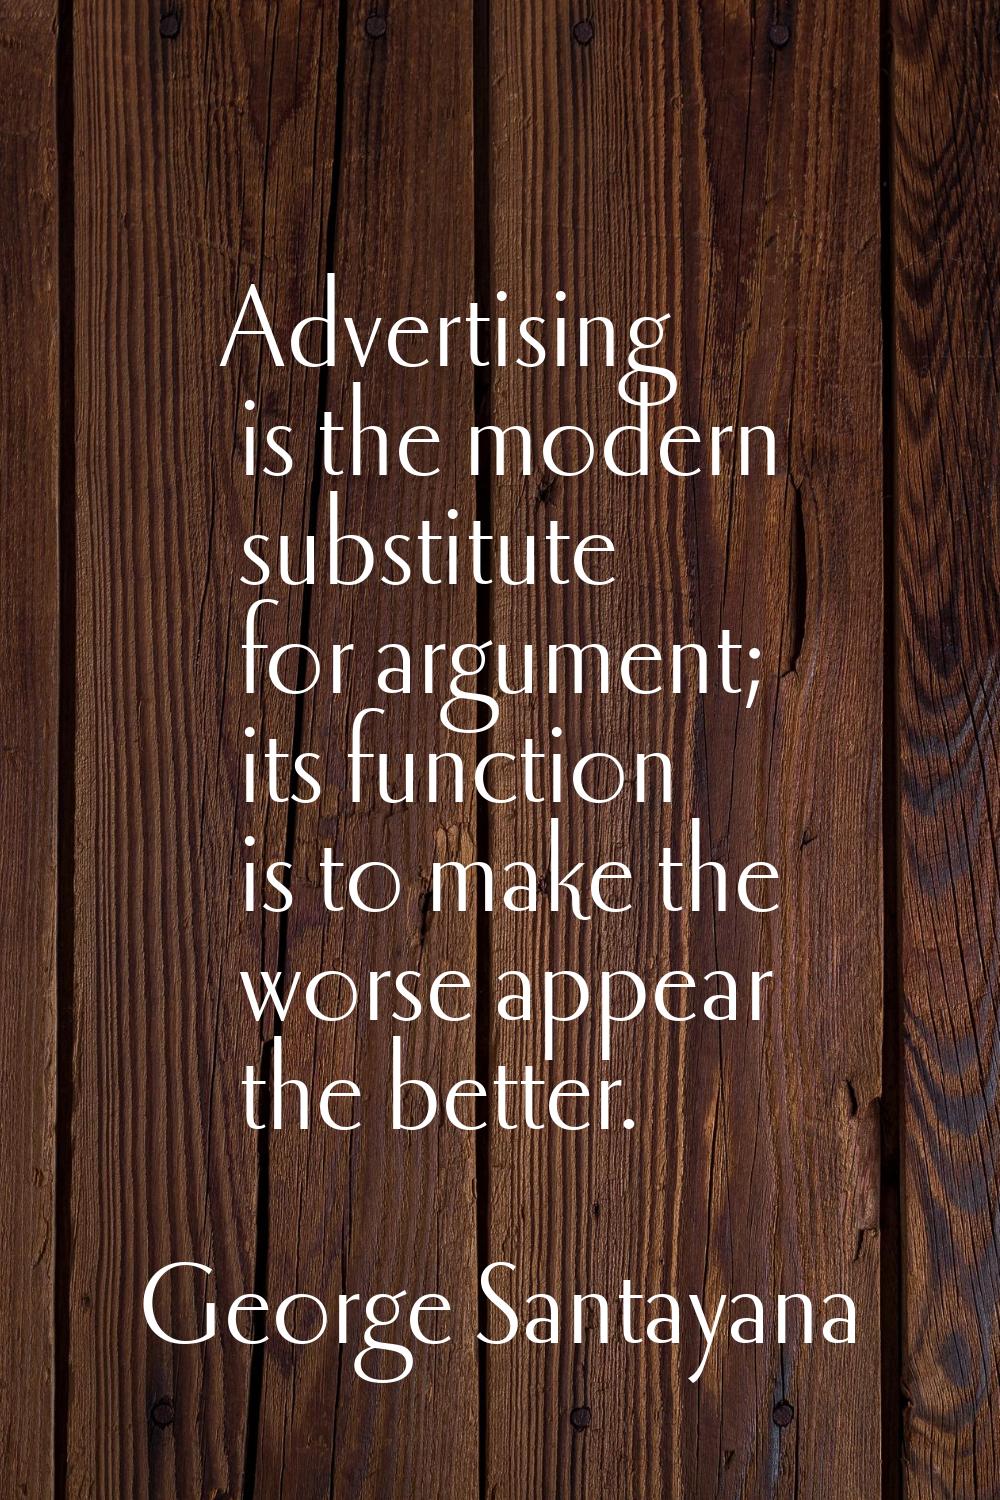 Advertising is the modern substitute for argument; its function is to make the worse appear the bet